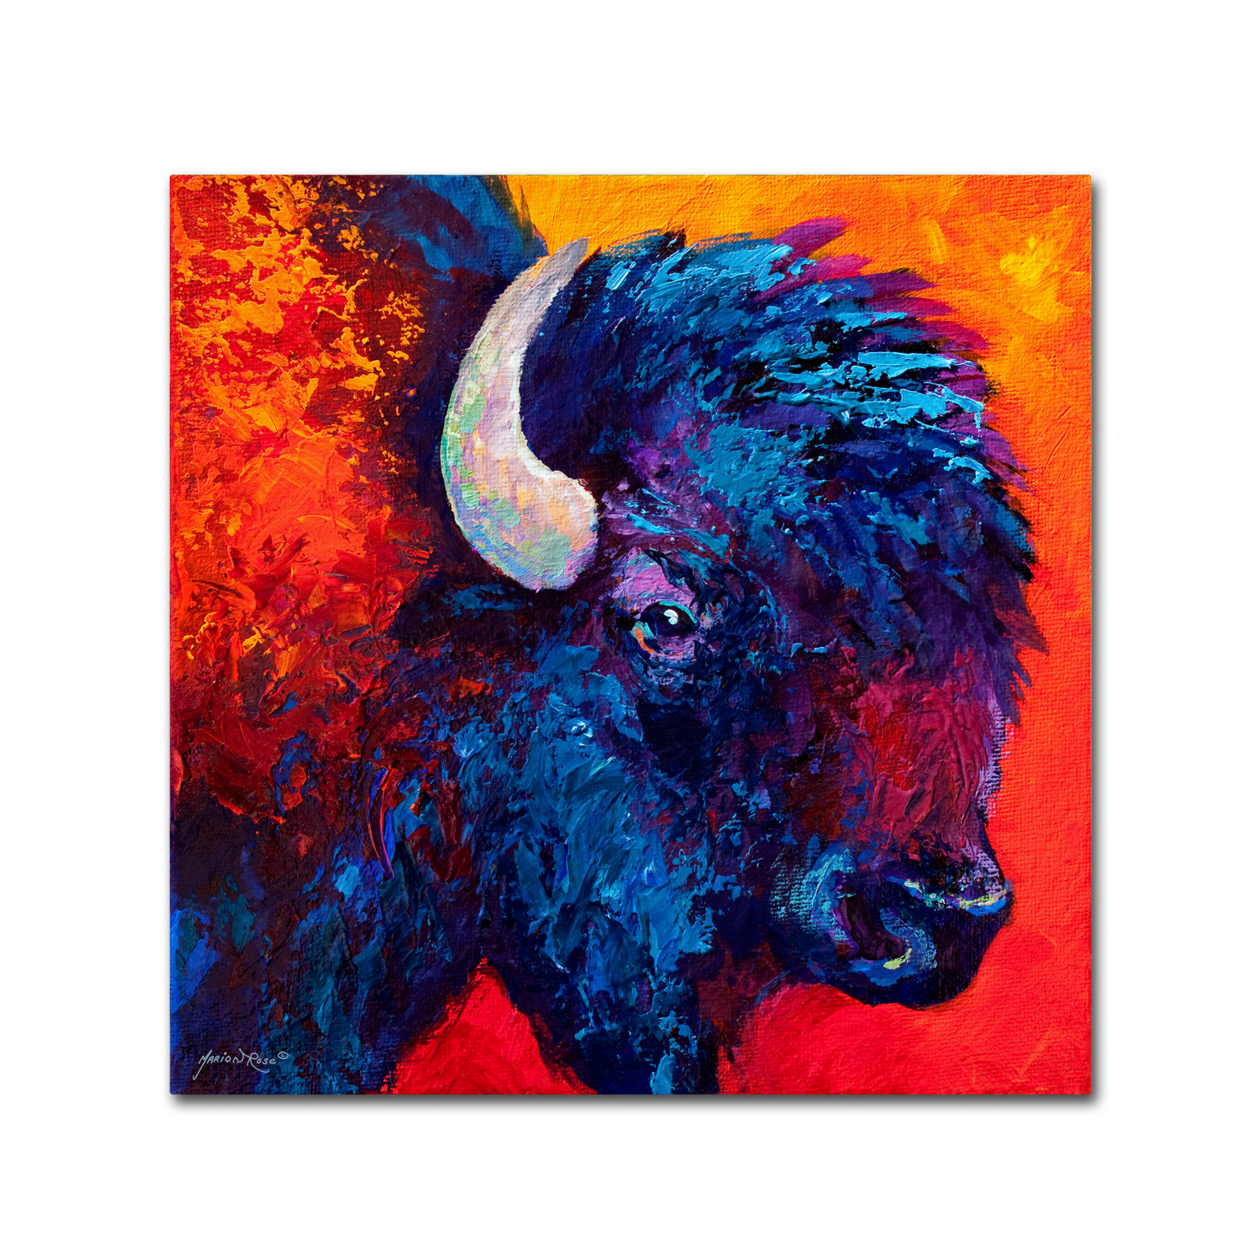 Marion Rose 'Bison Head II' Ready To Hang Canvas Art 35 X 35 Inches Made In USA